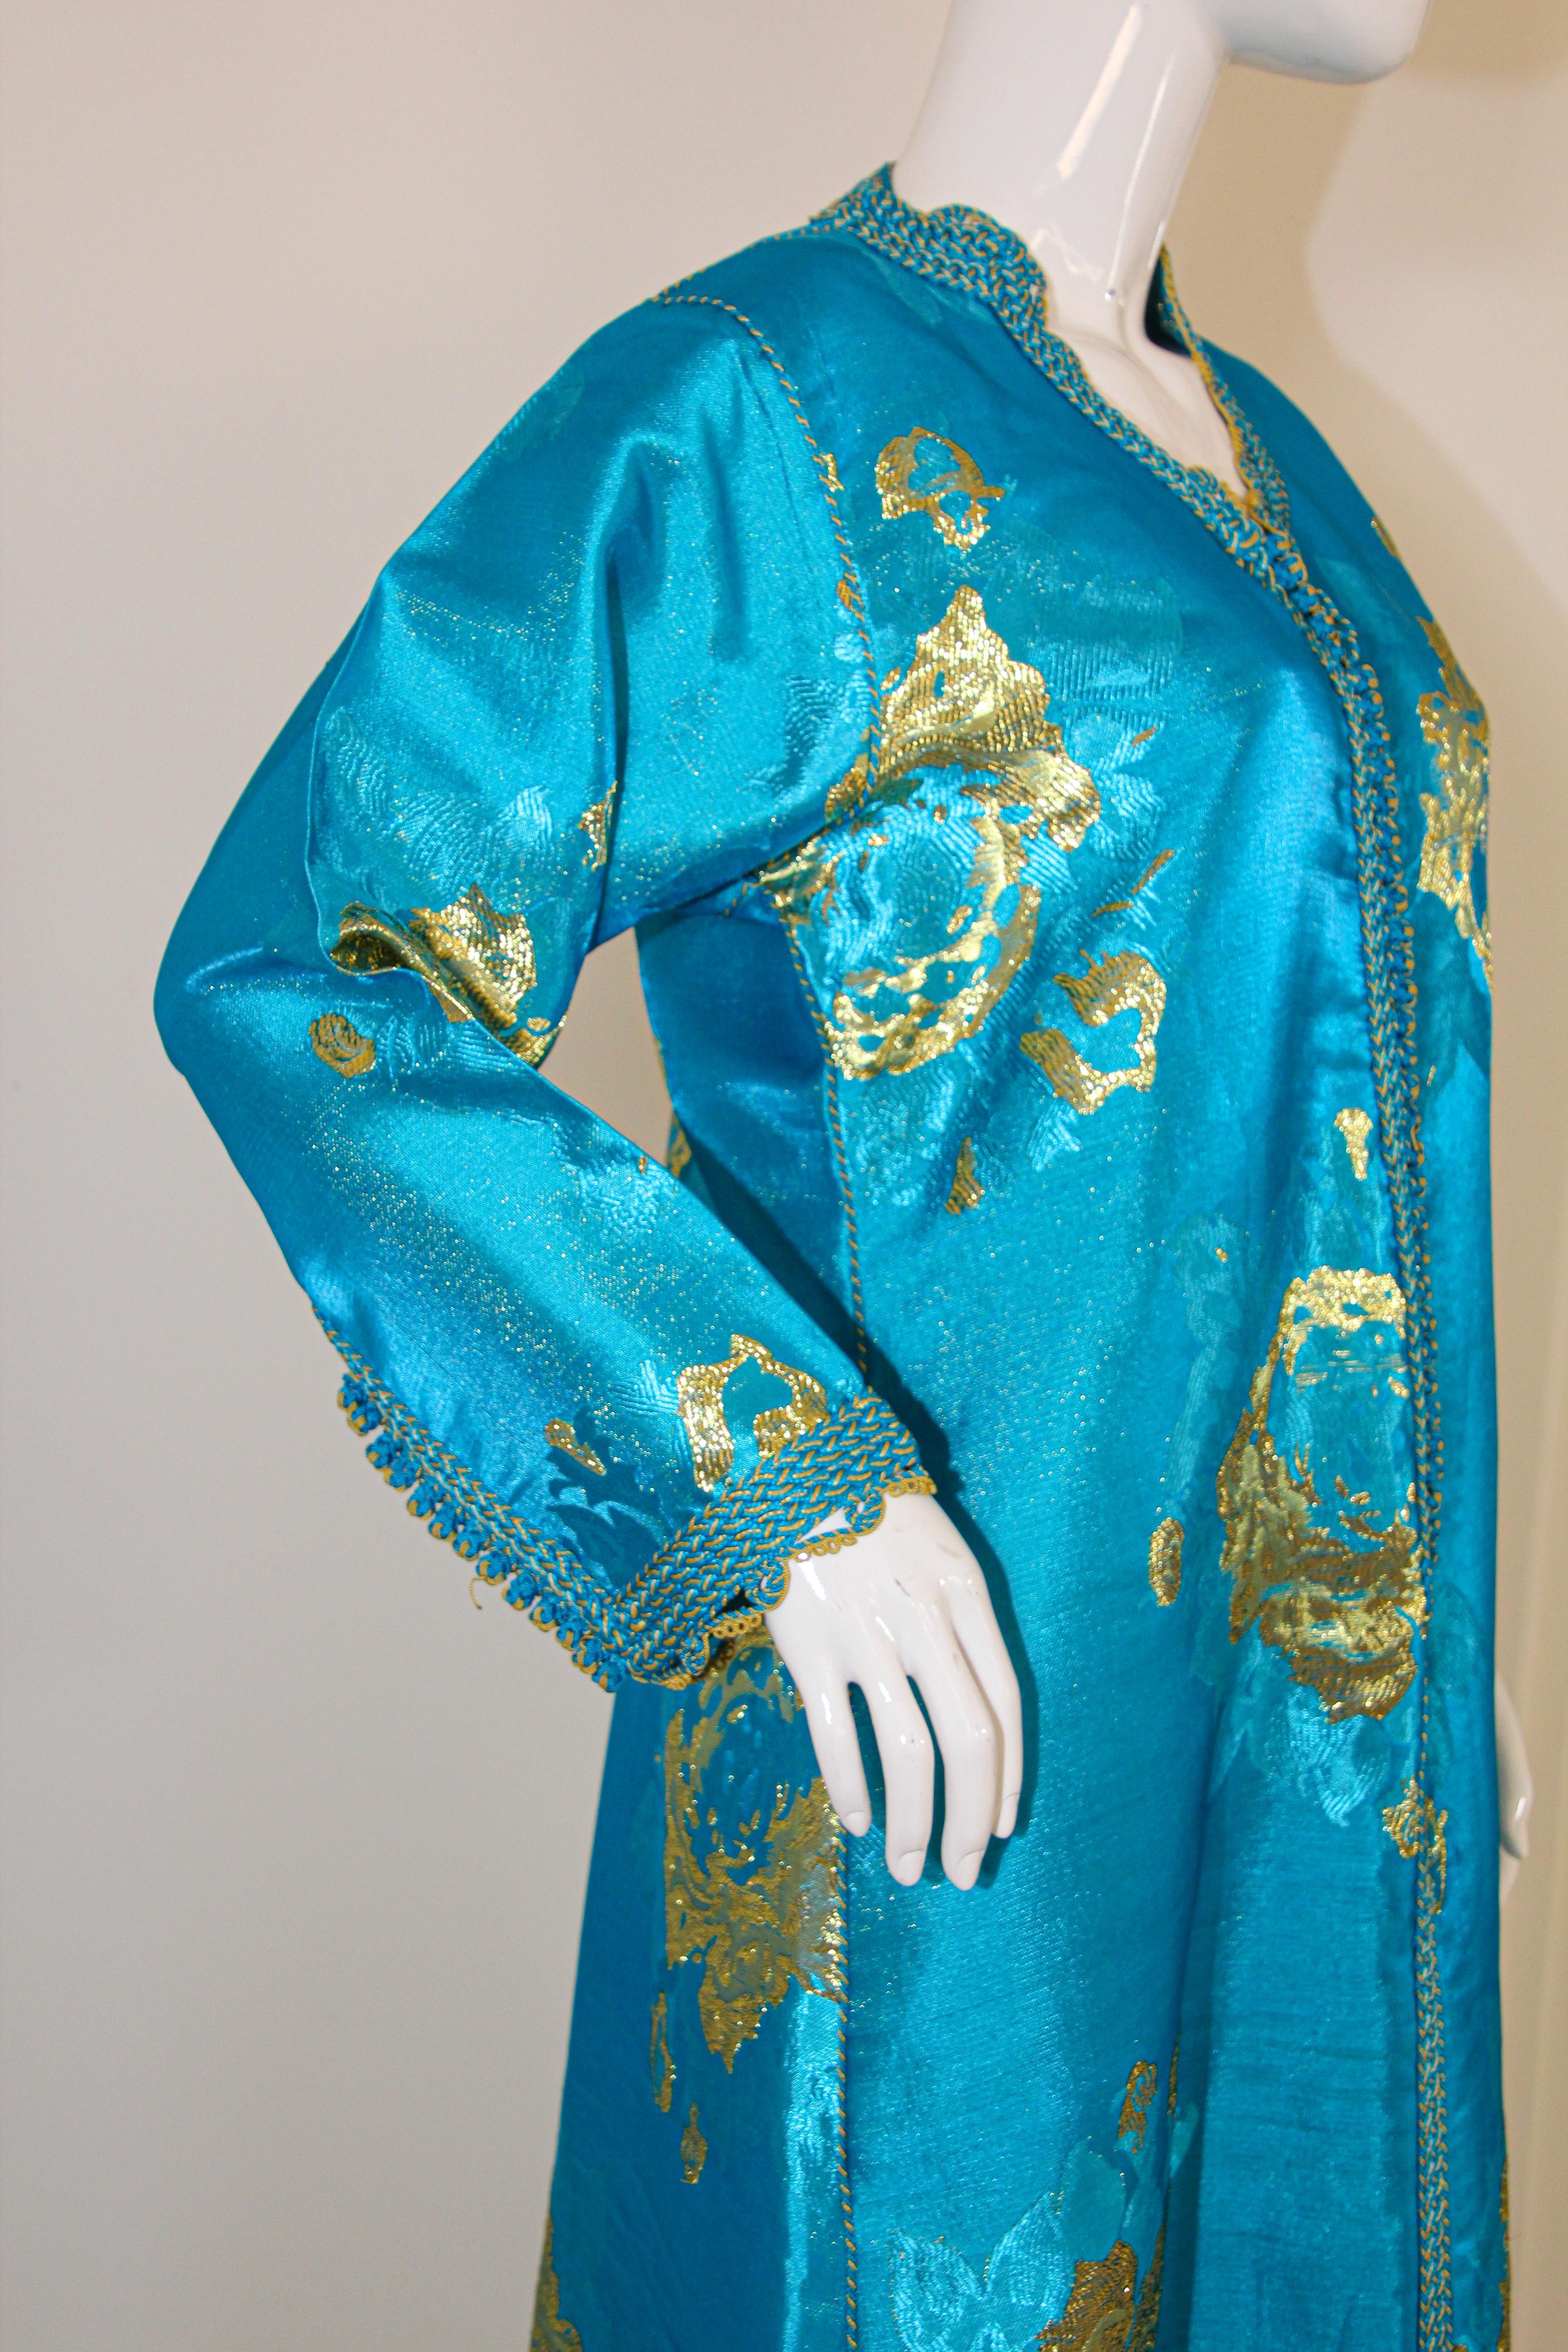 Moroccan Kaftan in Turquoise and Gold Floral Brocade Metallic Lame 7